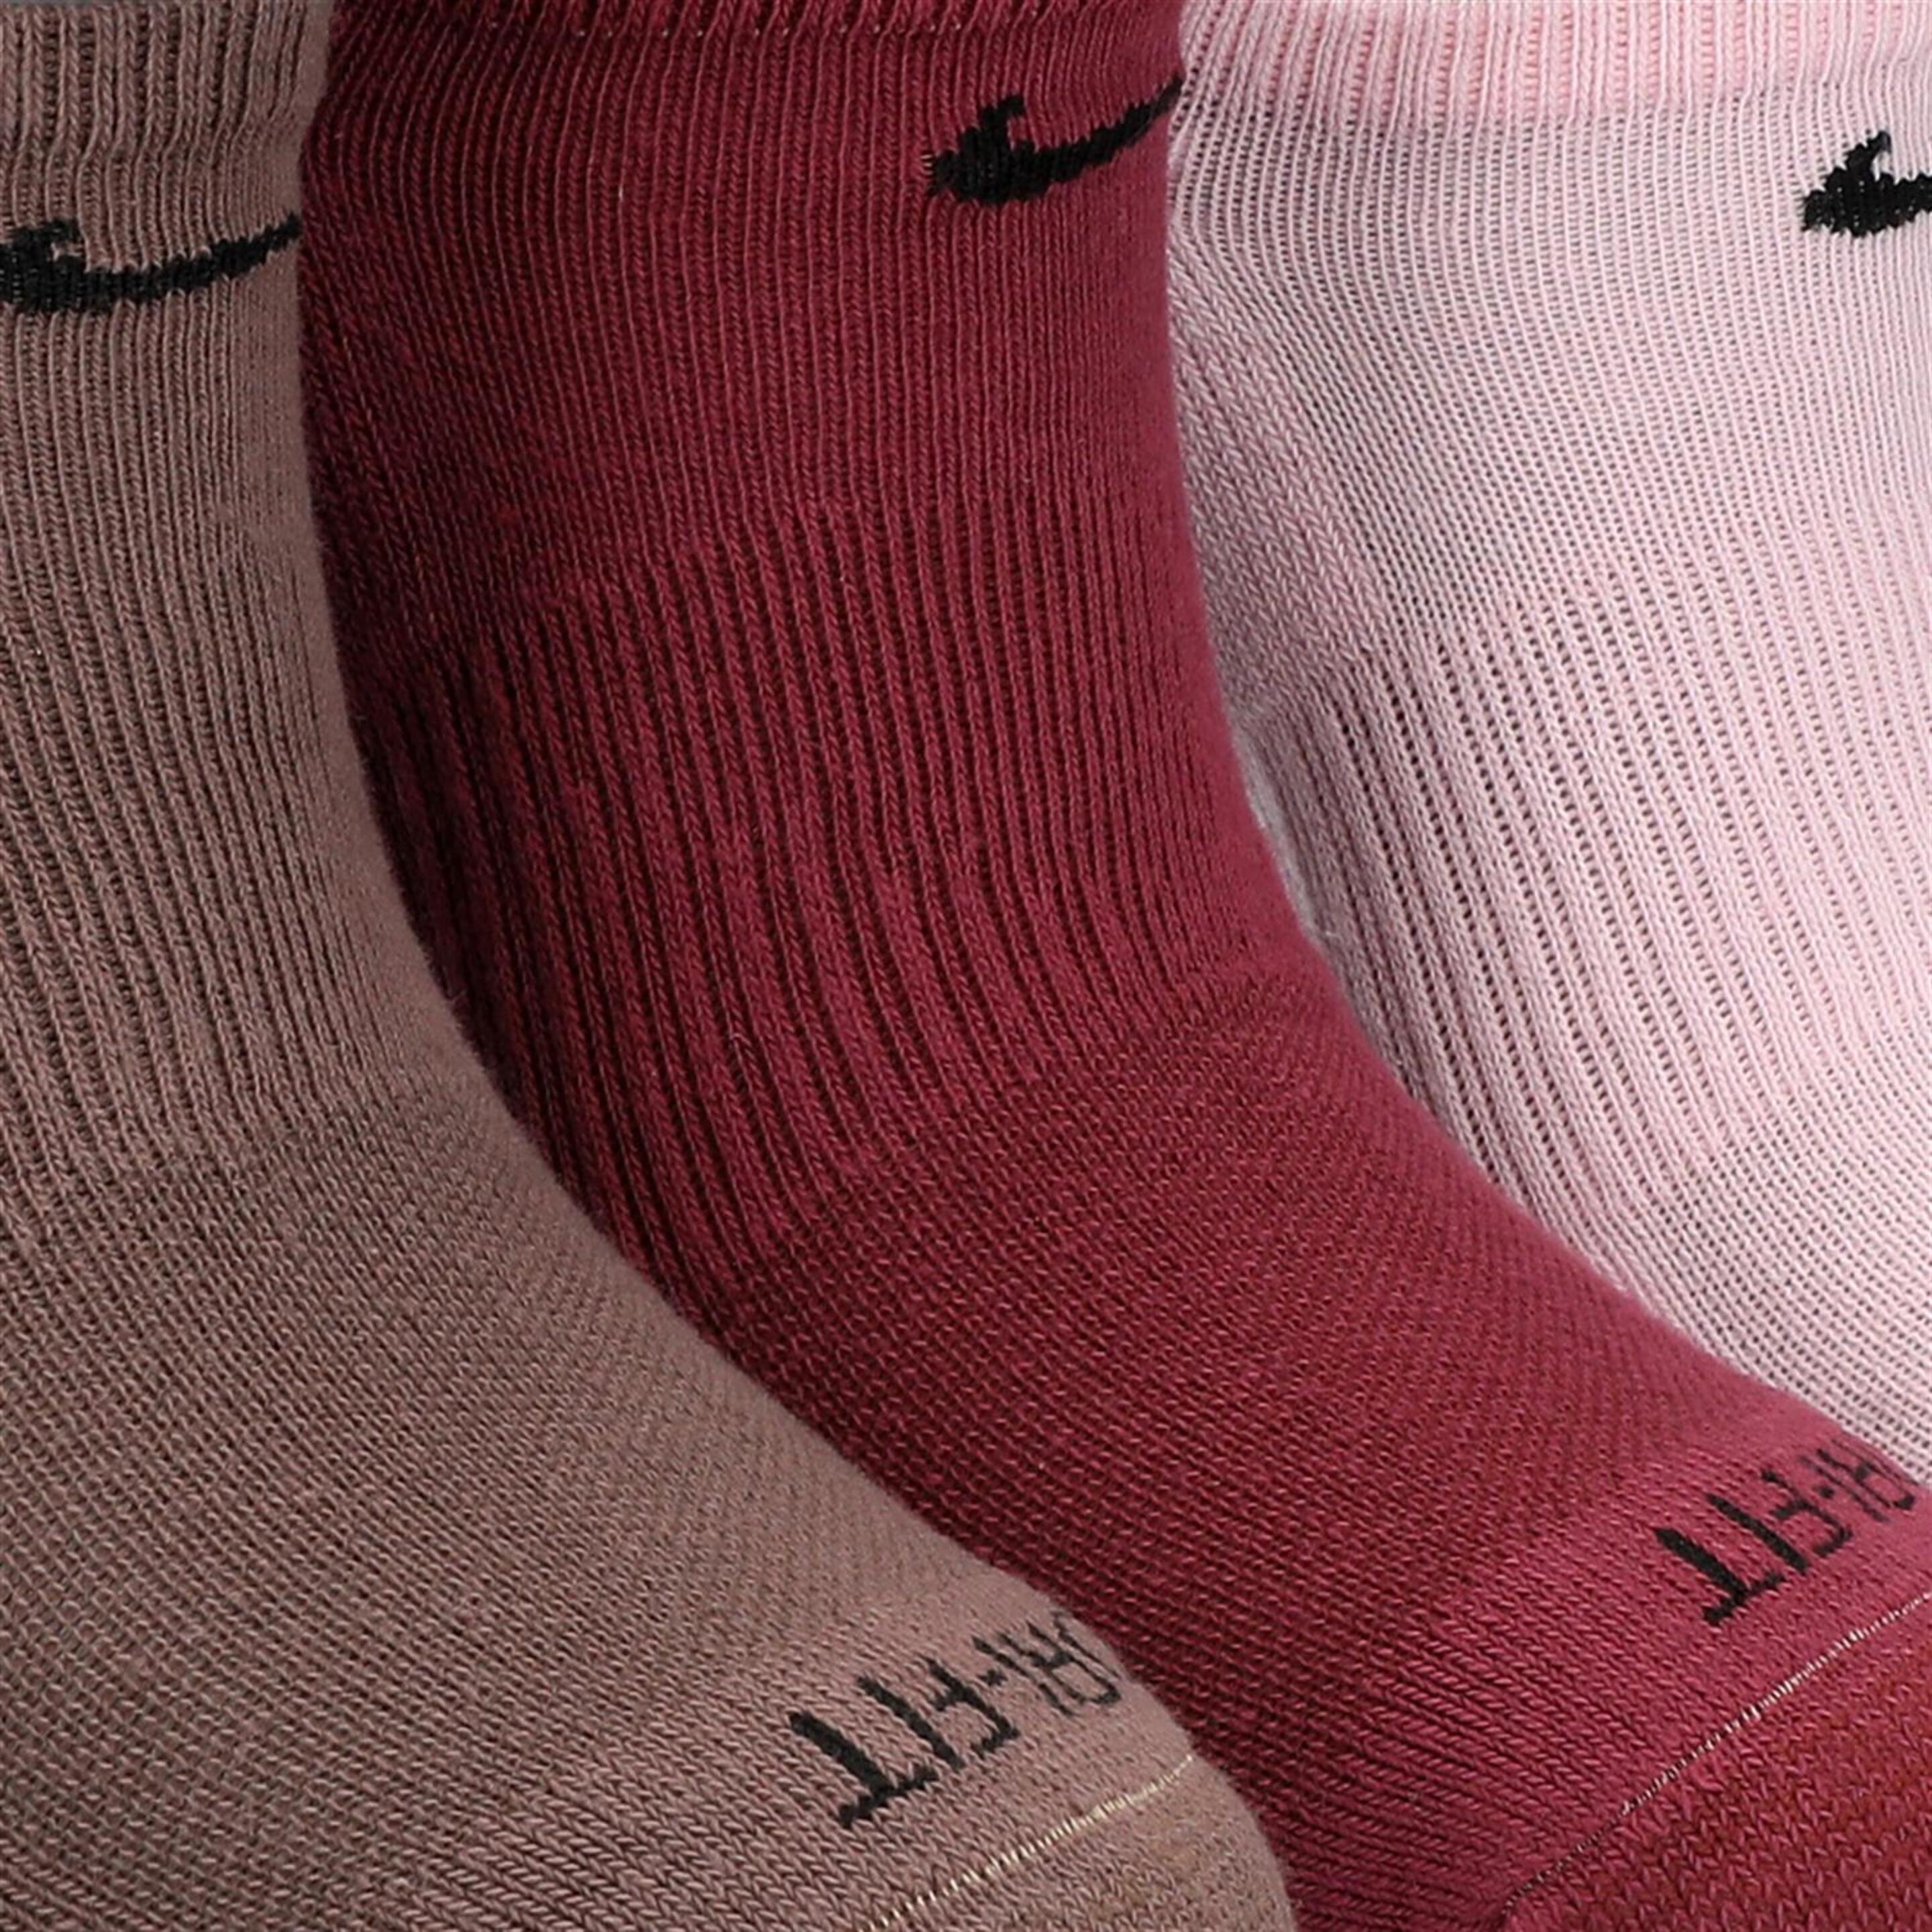 Nike Everyday Plus - Marrón - Calcetines Invisibles